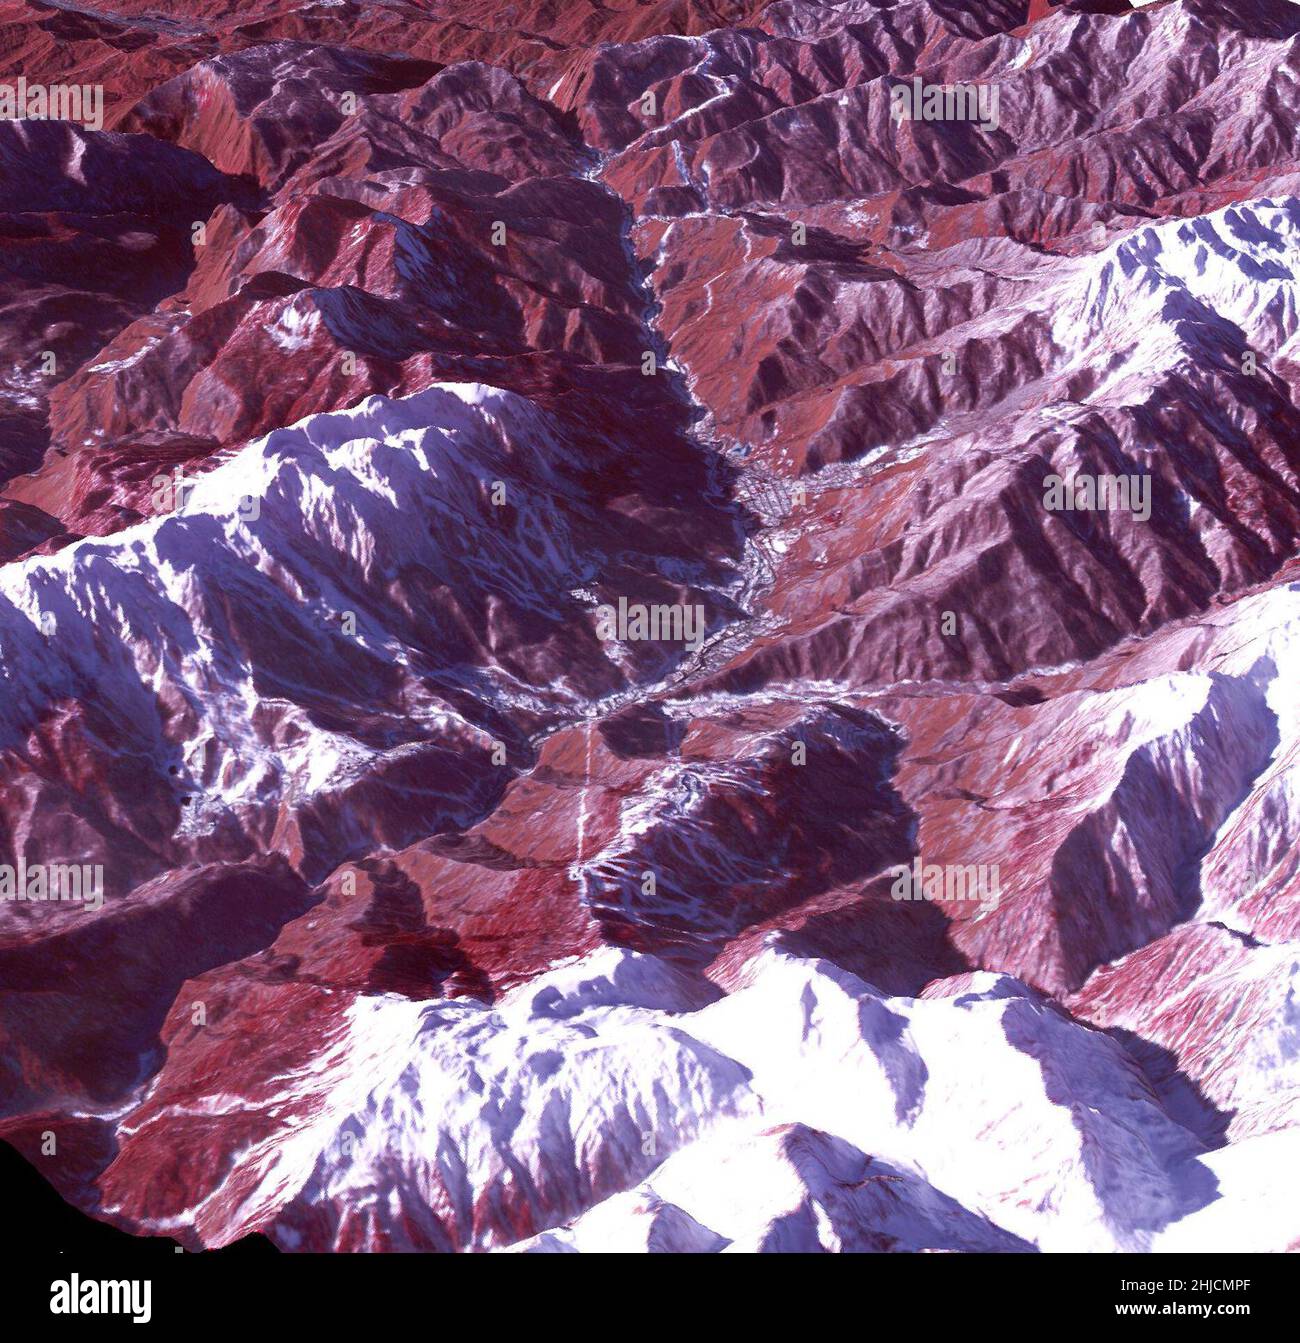 False color Image of the skiing and snowboarding sites for the 2014 Winter Olympics in Sochi, Russia, acquired on Jan. 4, 2014, by the Advanced Spaceborne Thermal Emission and Reflection Radiometer (ASTER) instrument on NASA's Terra spacecraft. Rosa Khutar ski resort near Sochi, Russia, is in the valley at center, and the runs are visible on the shadowed slopes on the left-hand side of the valley. Height has been exaggerated 1.5 times to bring out topographic details.  In this southwest-looking image, red indicates vegetation, white is snow, and the resort site appears in gray. Stock Photo